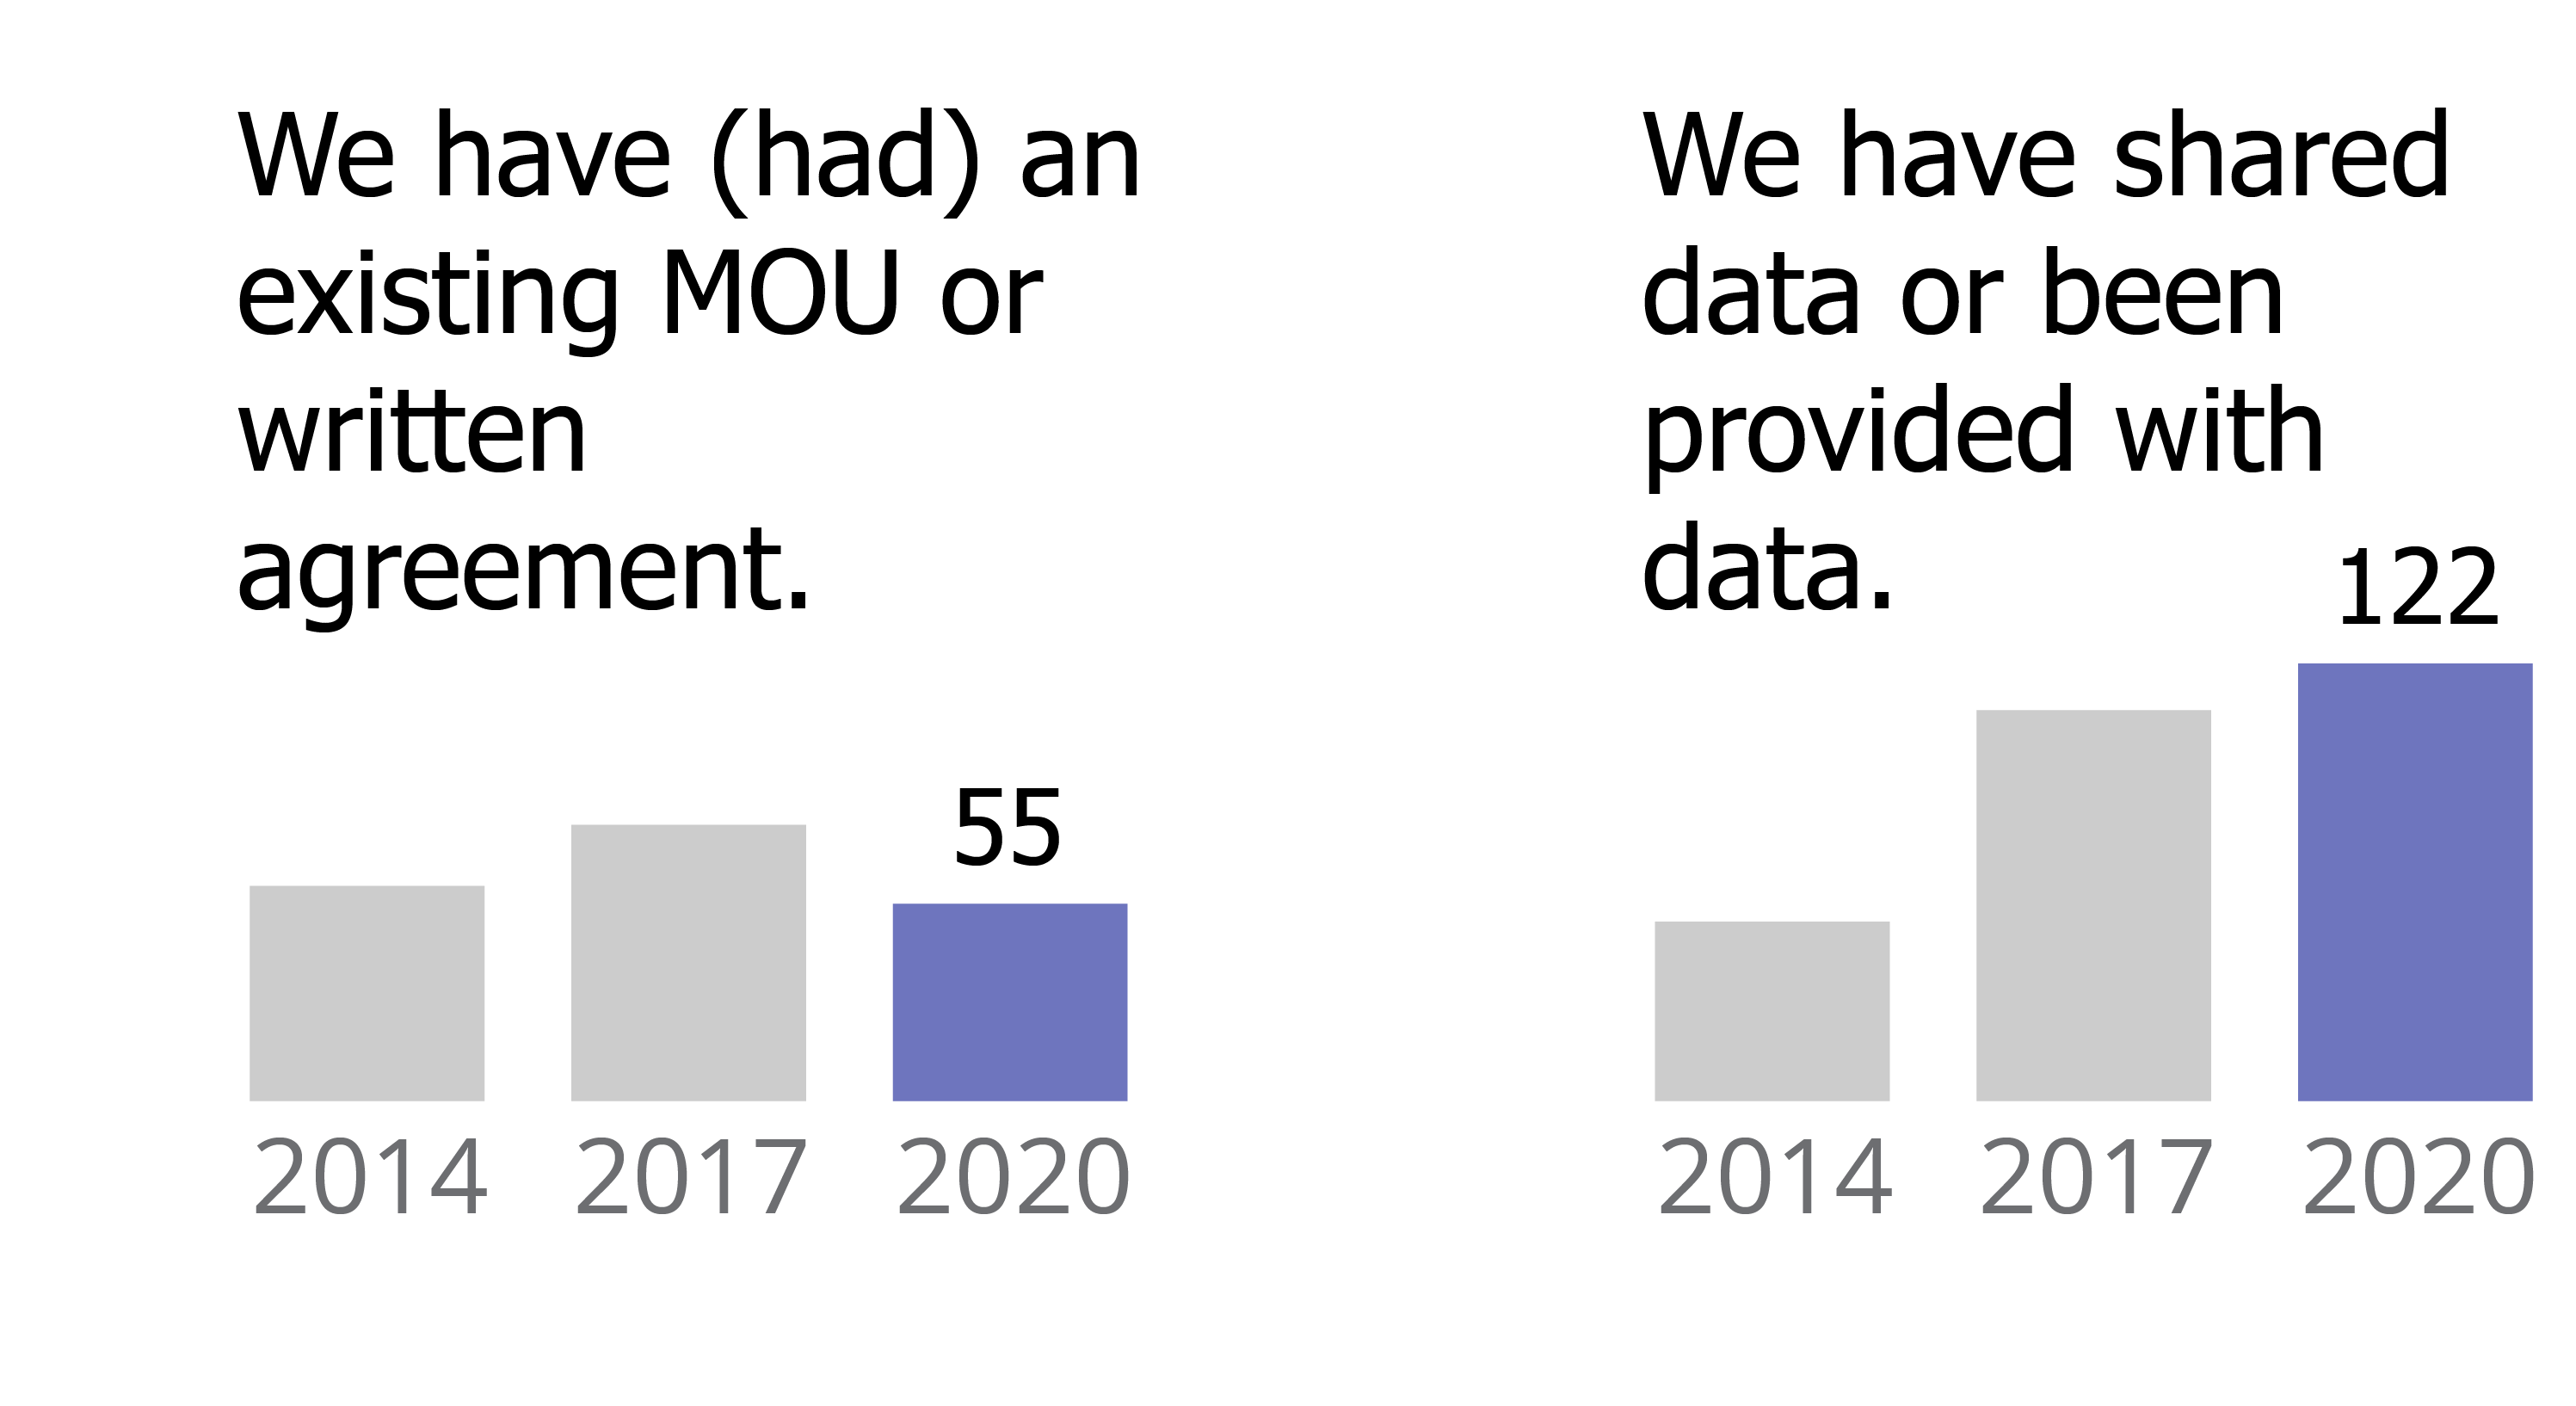 55 organizations reported an existing MOU or written agreement in 2020 compared to 60 in 2014. 122 organizations reported sharing or receiving data in 2020 compared to 50 in 2014.